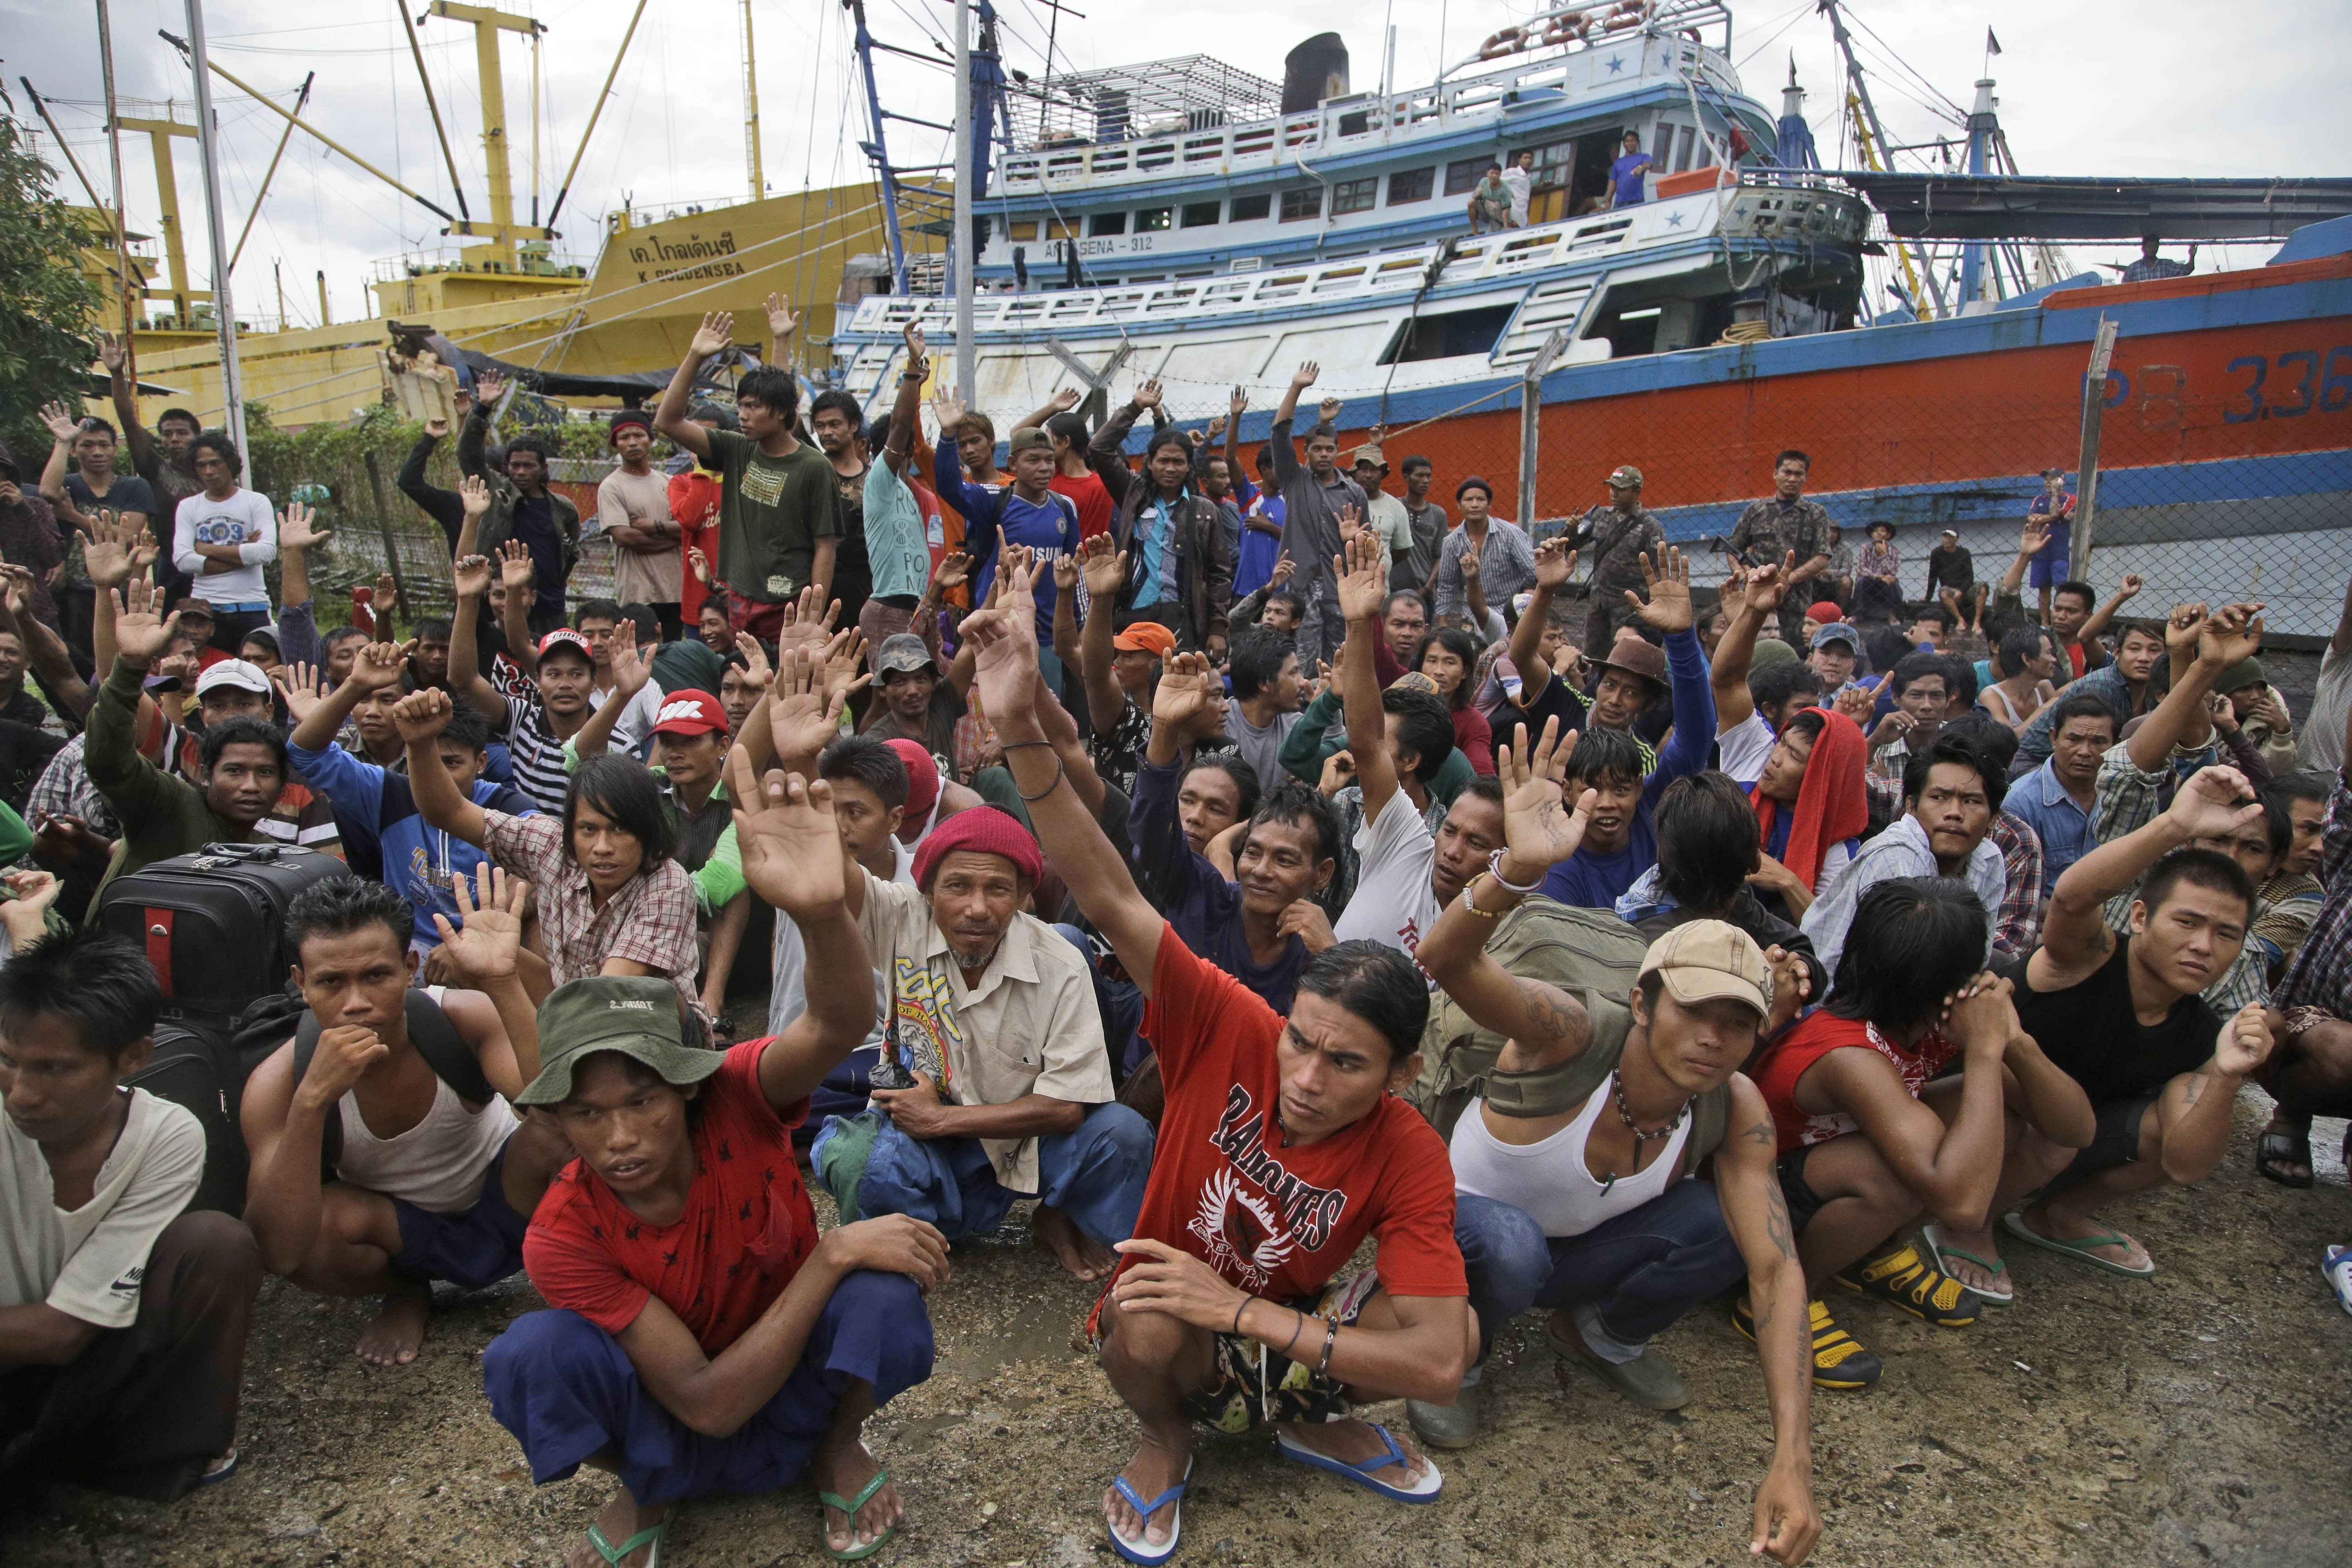 Burmese fishermen raise their hands when they are asked who wants to go home, following a report on rampant slavery in the fishing industry in the remote Indonesian island village of Benjina. Photo: AP